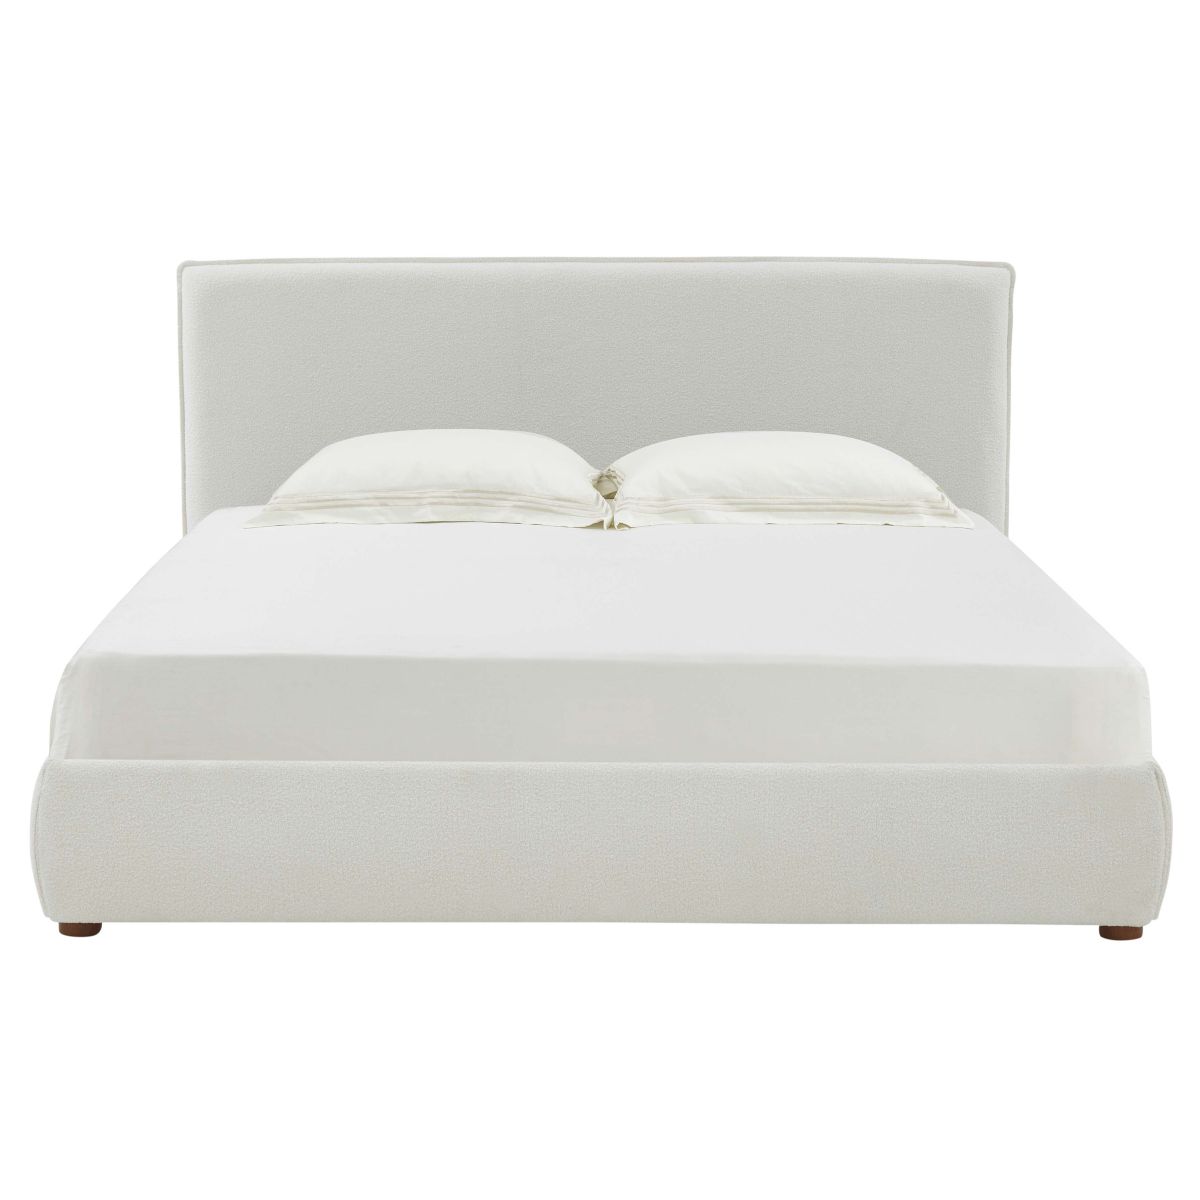 Safavieh Couture Callahan Boucle Bed